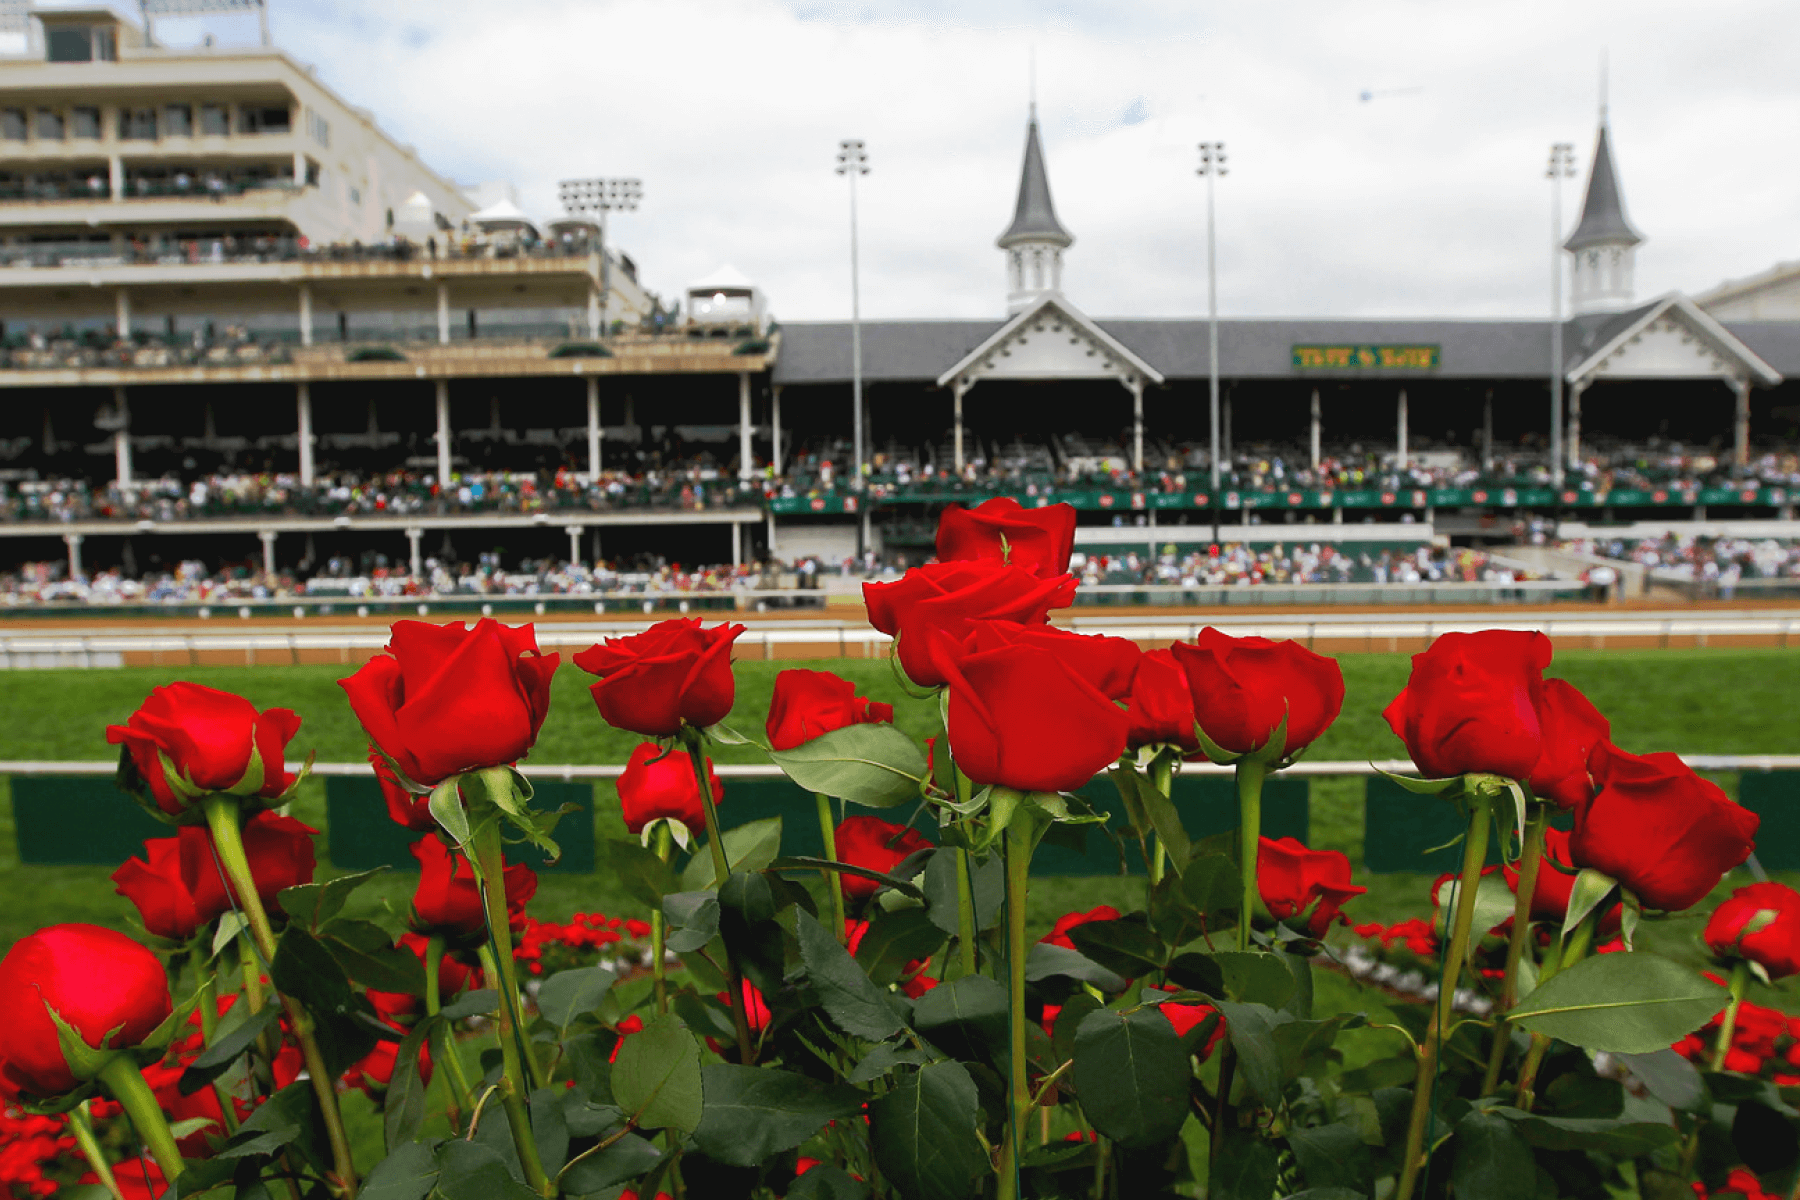 40 surebet Kentucky Derby party ideas for the big race day Paperless